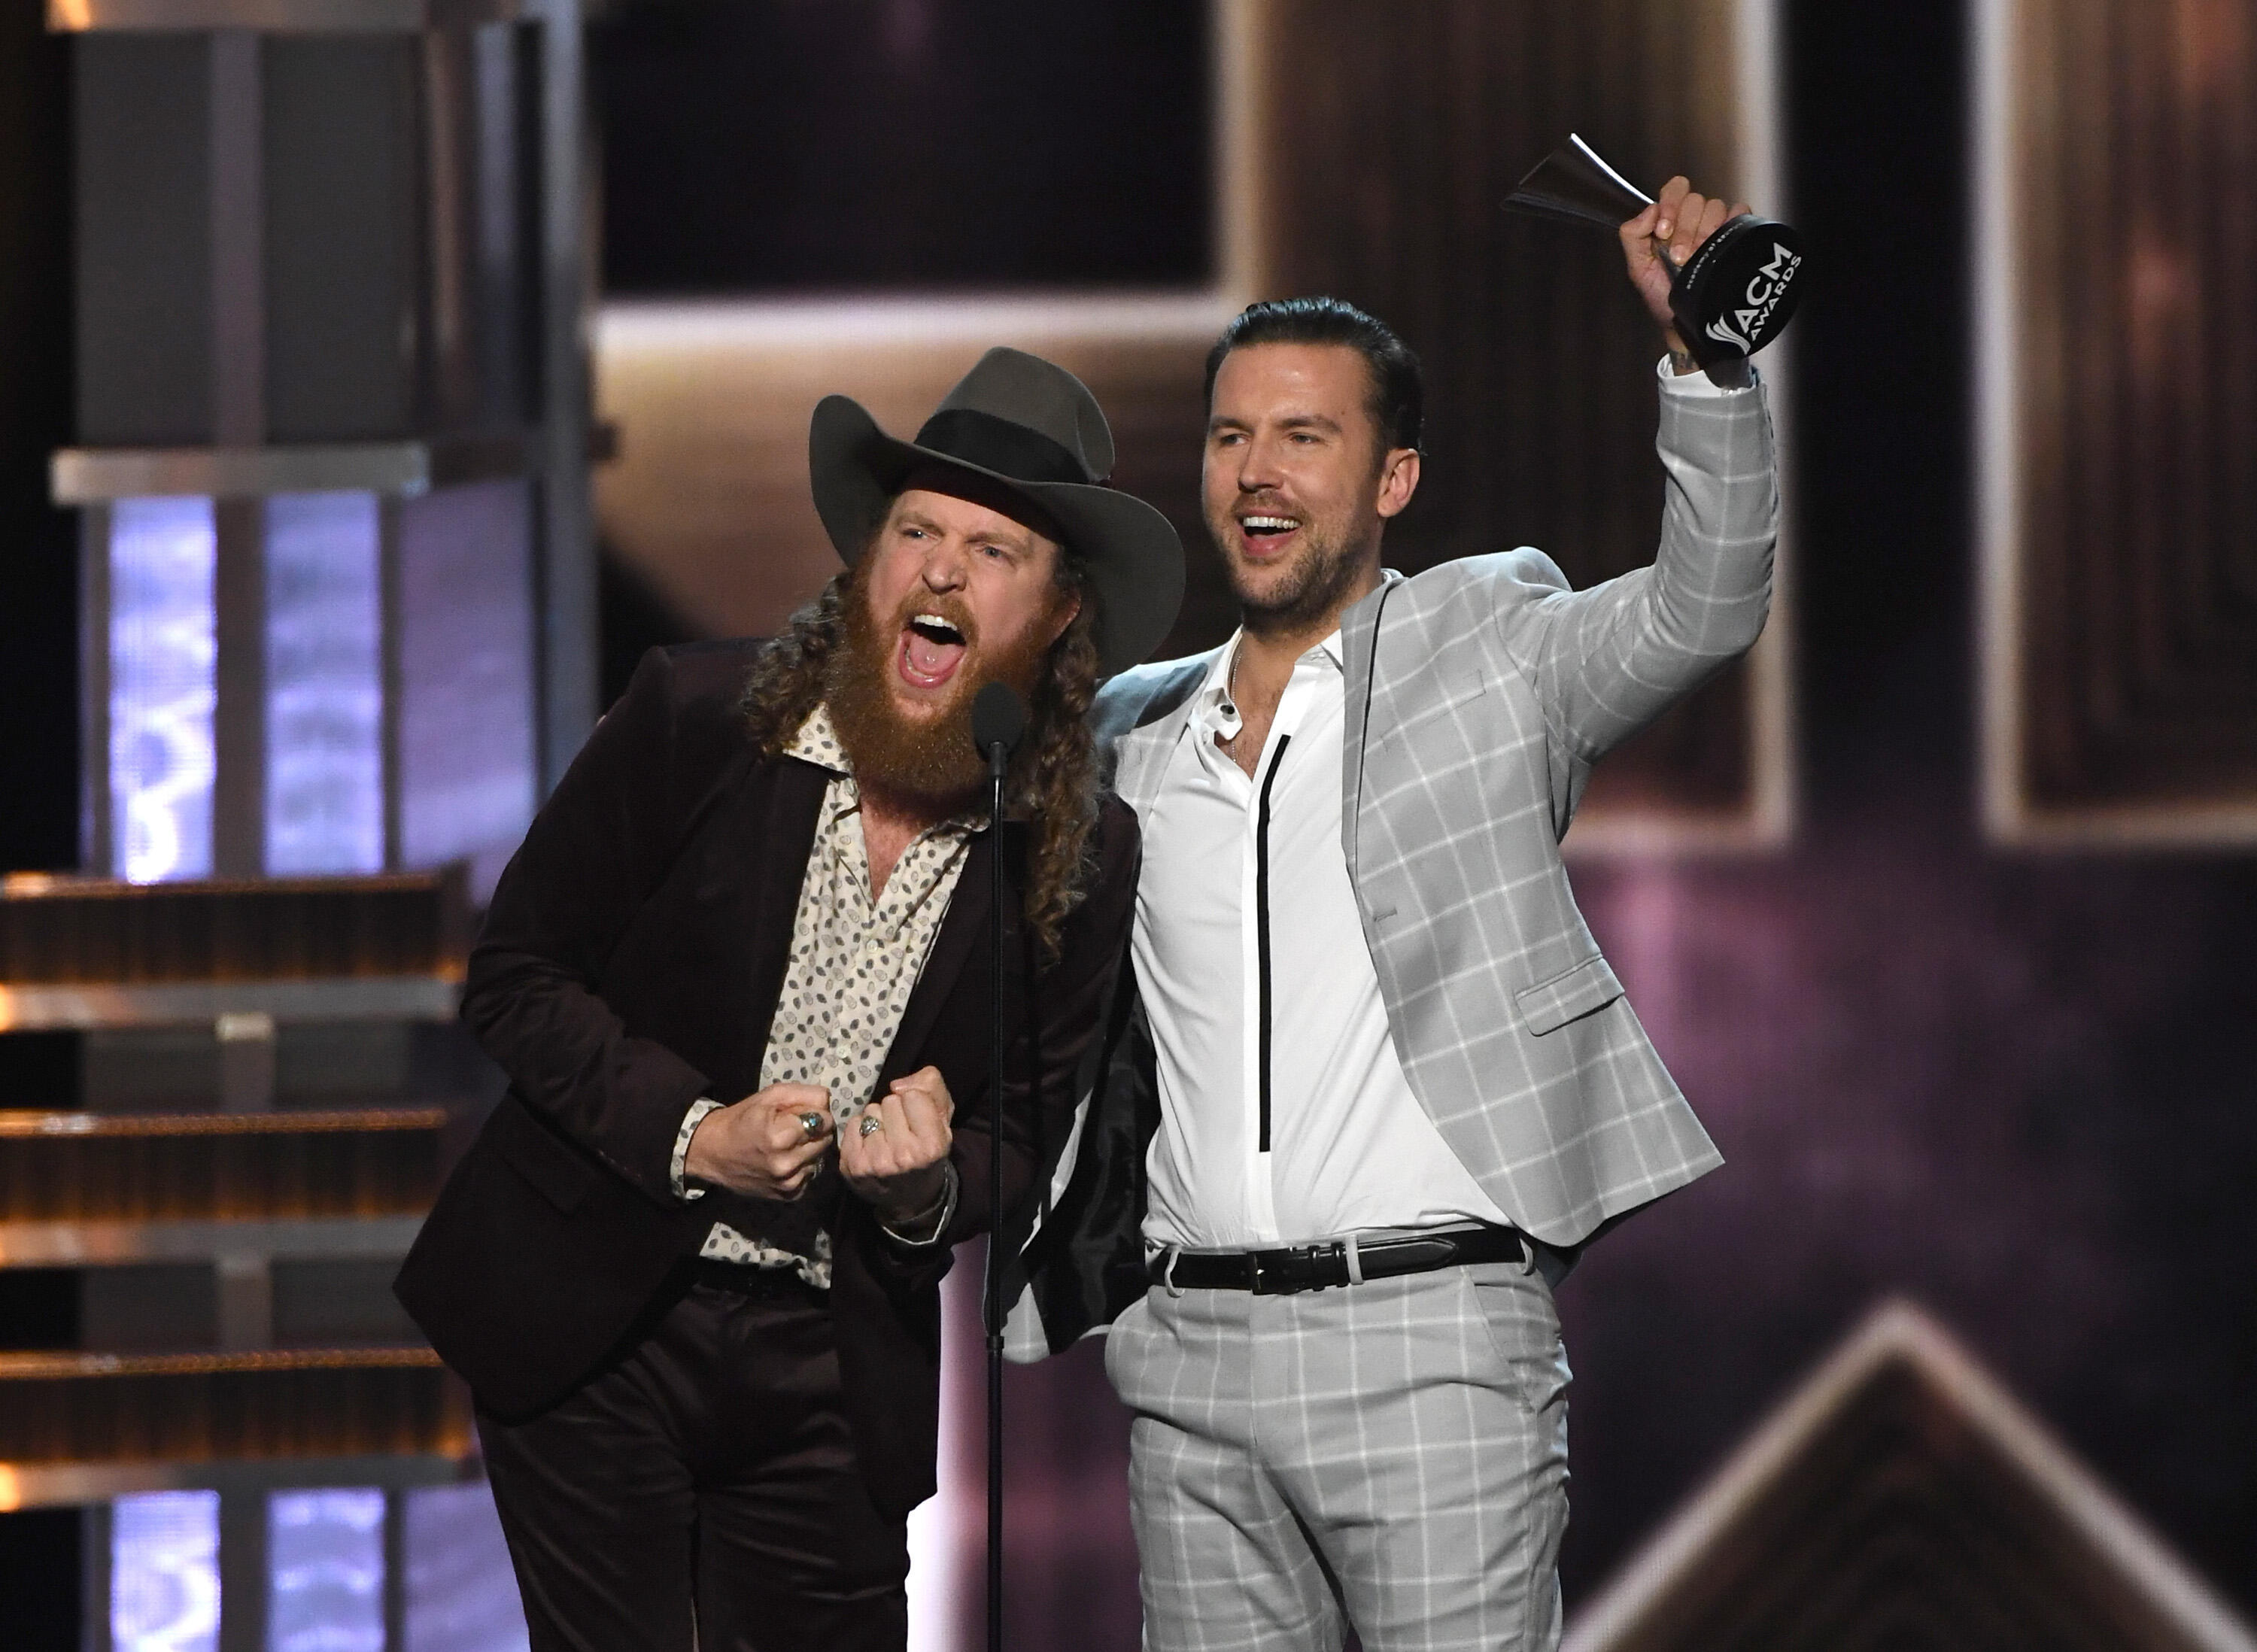 LAS VEGAS, NV - APRIL 02:  Recording artists John Osborne (L) and T.J. Osborne of music group Brothers Osborne accept the Vocal Duo of the Year award onstage during the 52nd Academy Of Country Music Awards at T-Mobile Arena on April 2, 2017 in Las Vegas, 